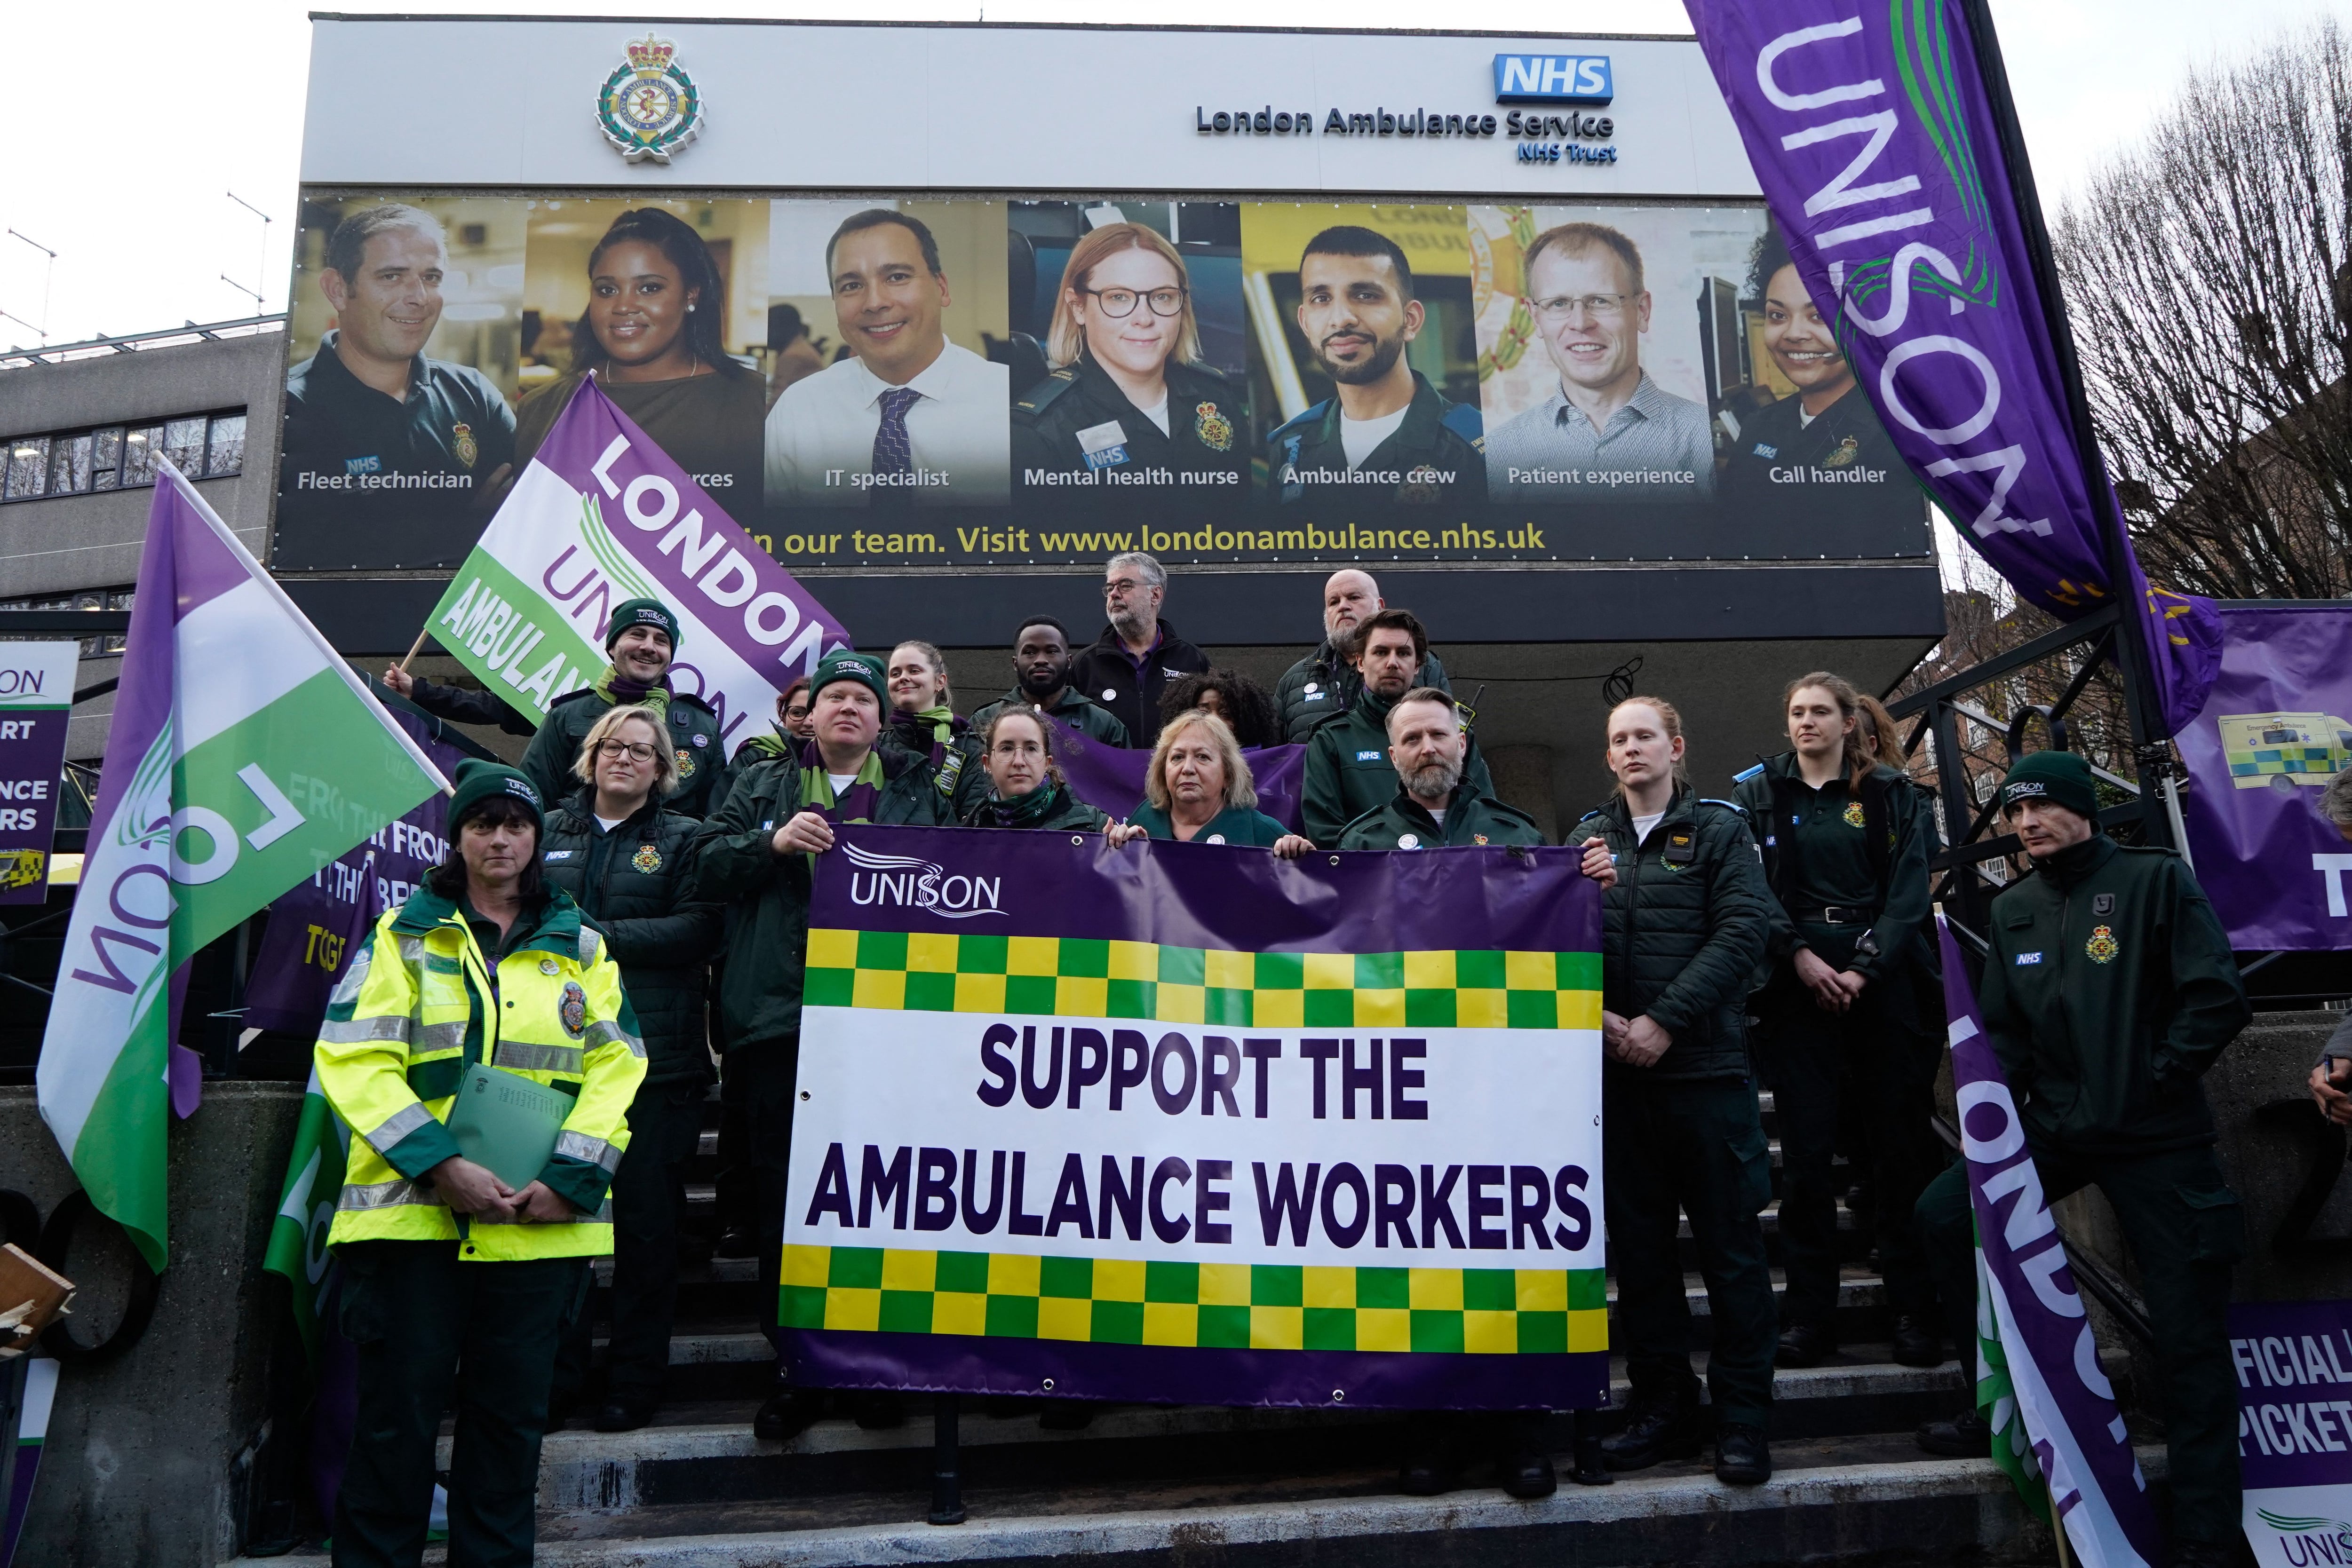 UNISON General Secretary Christina McAnea poses with ambulance workers at a strike outside Waterloo Ambulance Station in London on December 21, 2022. (Photo: AFP)